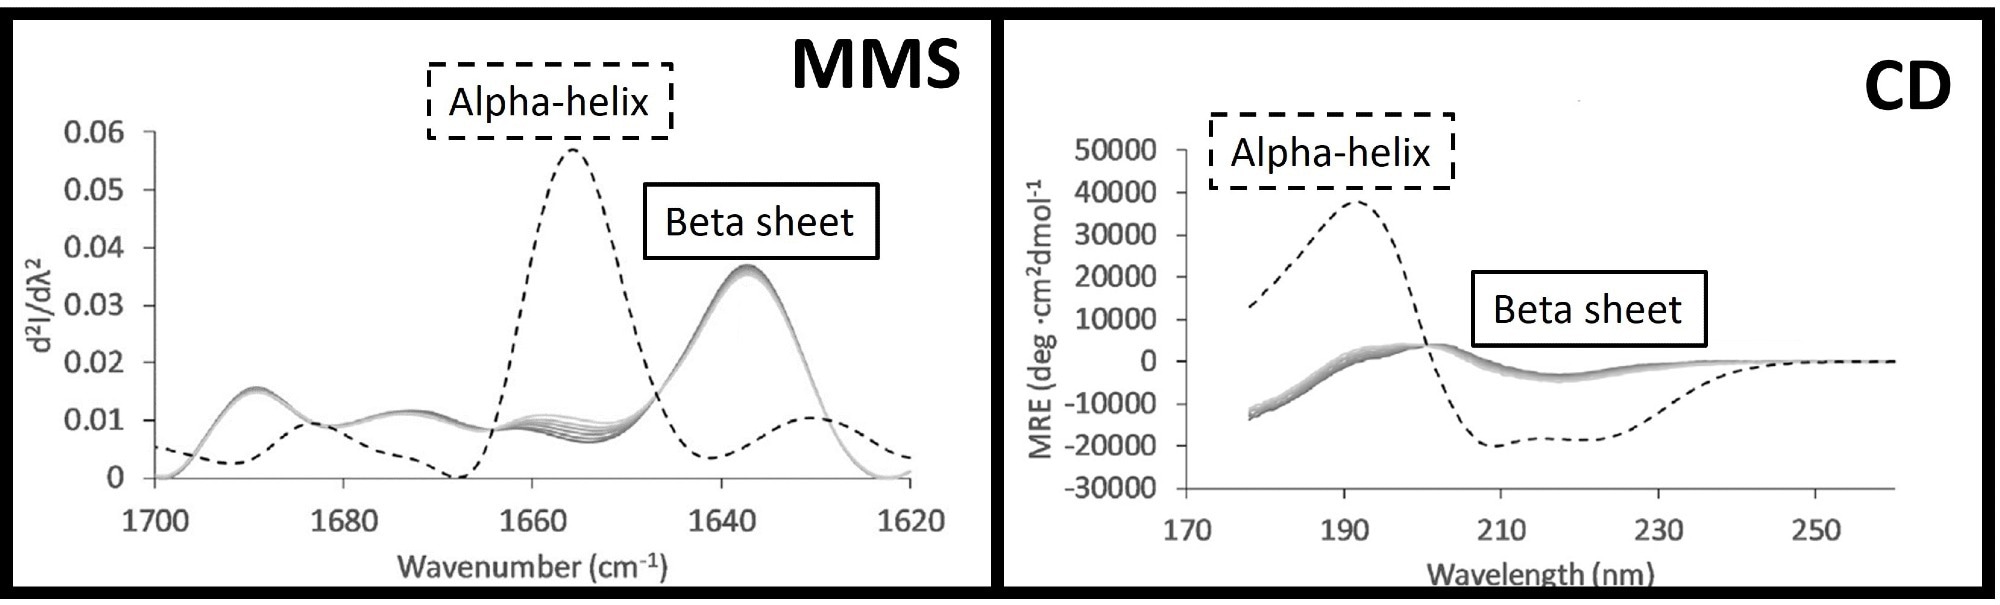 MMS (left) and CD (right) spectra of BSA (dashed lines) and IgG1 (solid lines), highlighting the overlapping features and differing intensities for alpha-helix and beta-sheet structures in CD and compared to the more well-resolved peaks in MMS. This figure was adapted from Kendrick et al.1